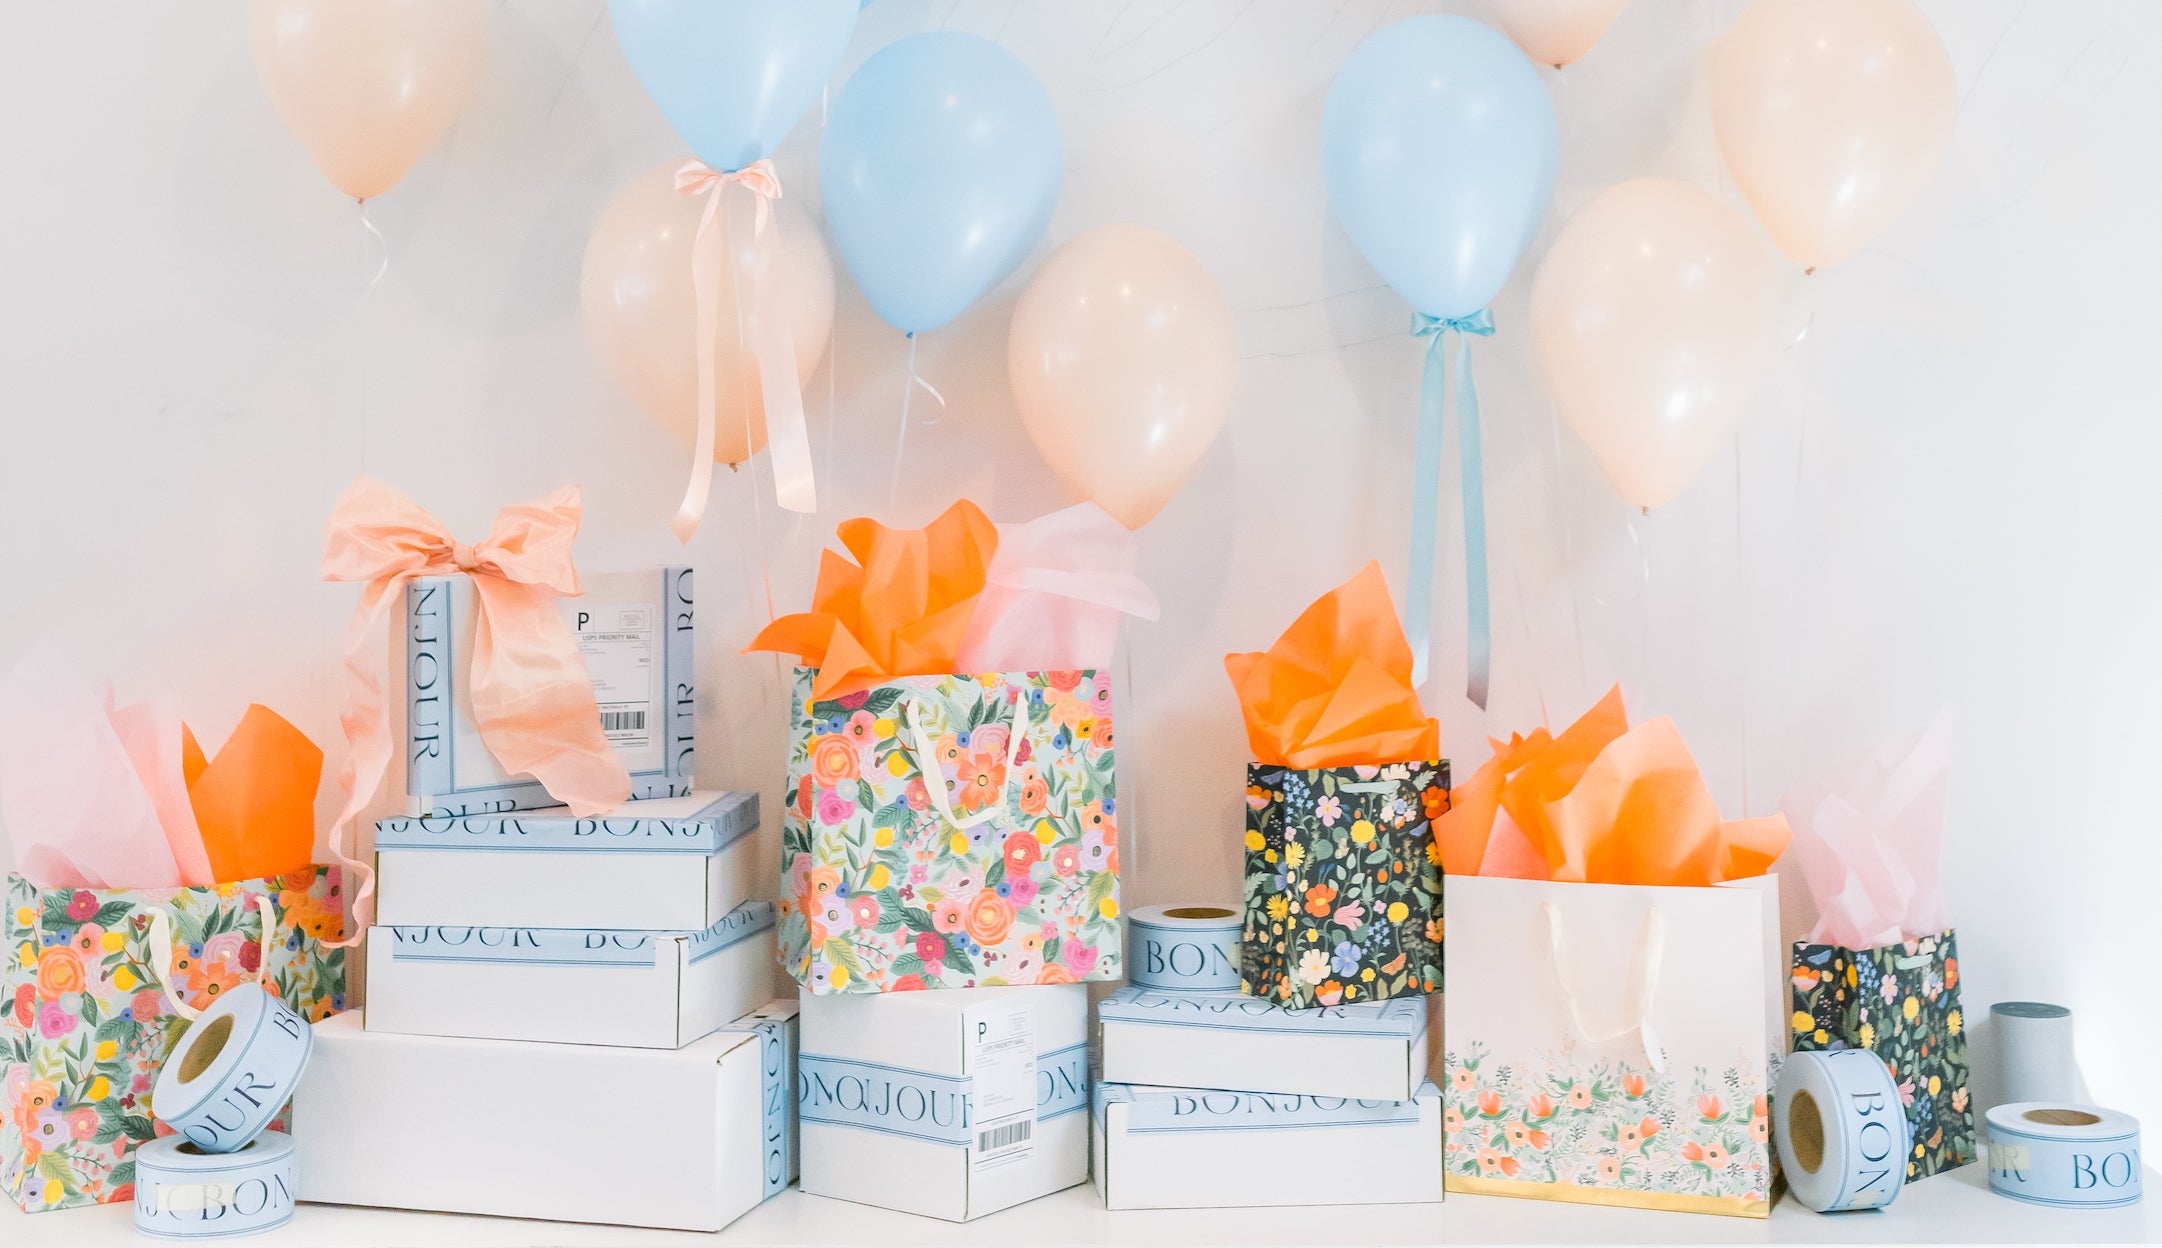 BONJOUR FÊTE: A Party Boutique - Party Supplies, Balloons, & Gifts ...